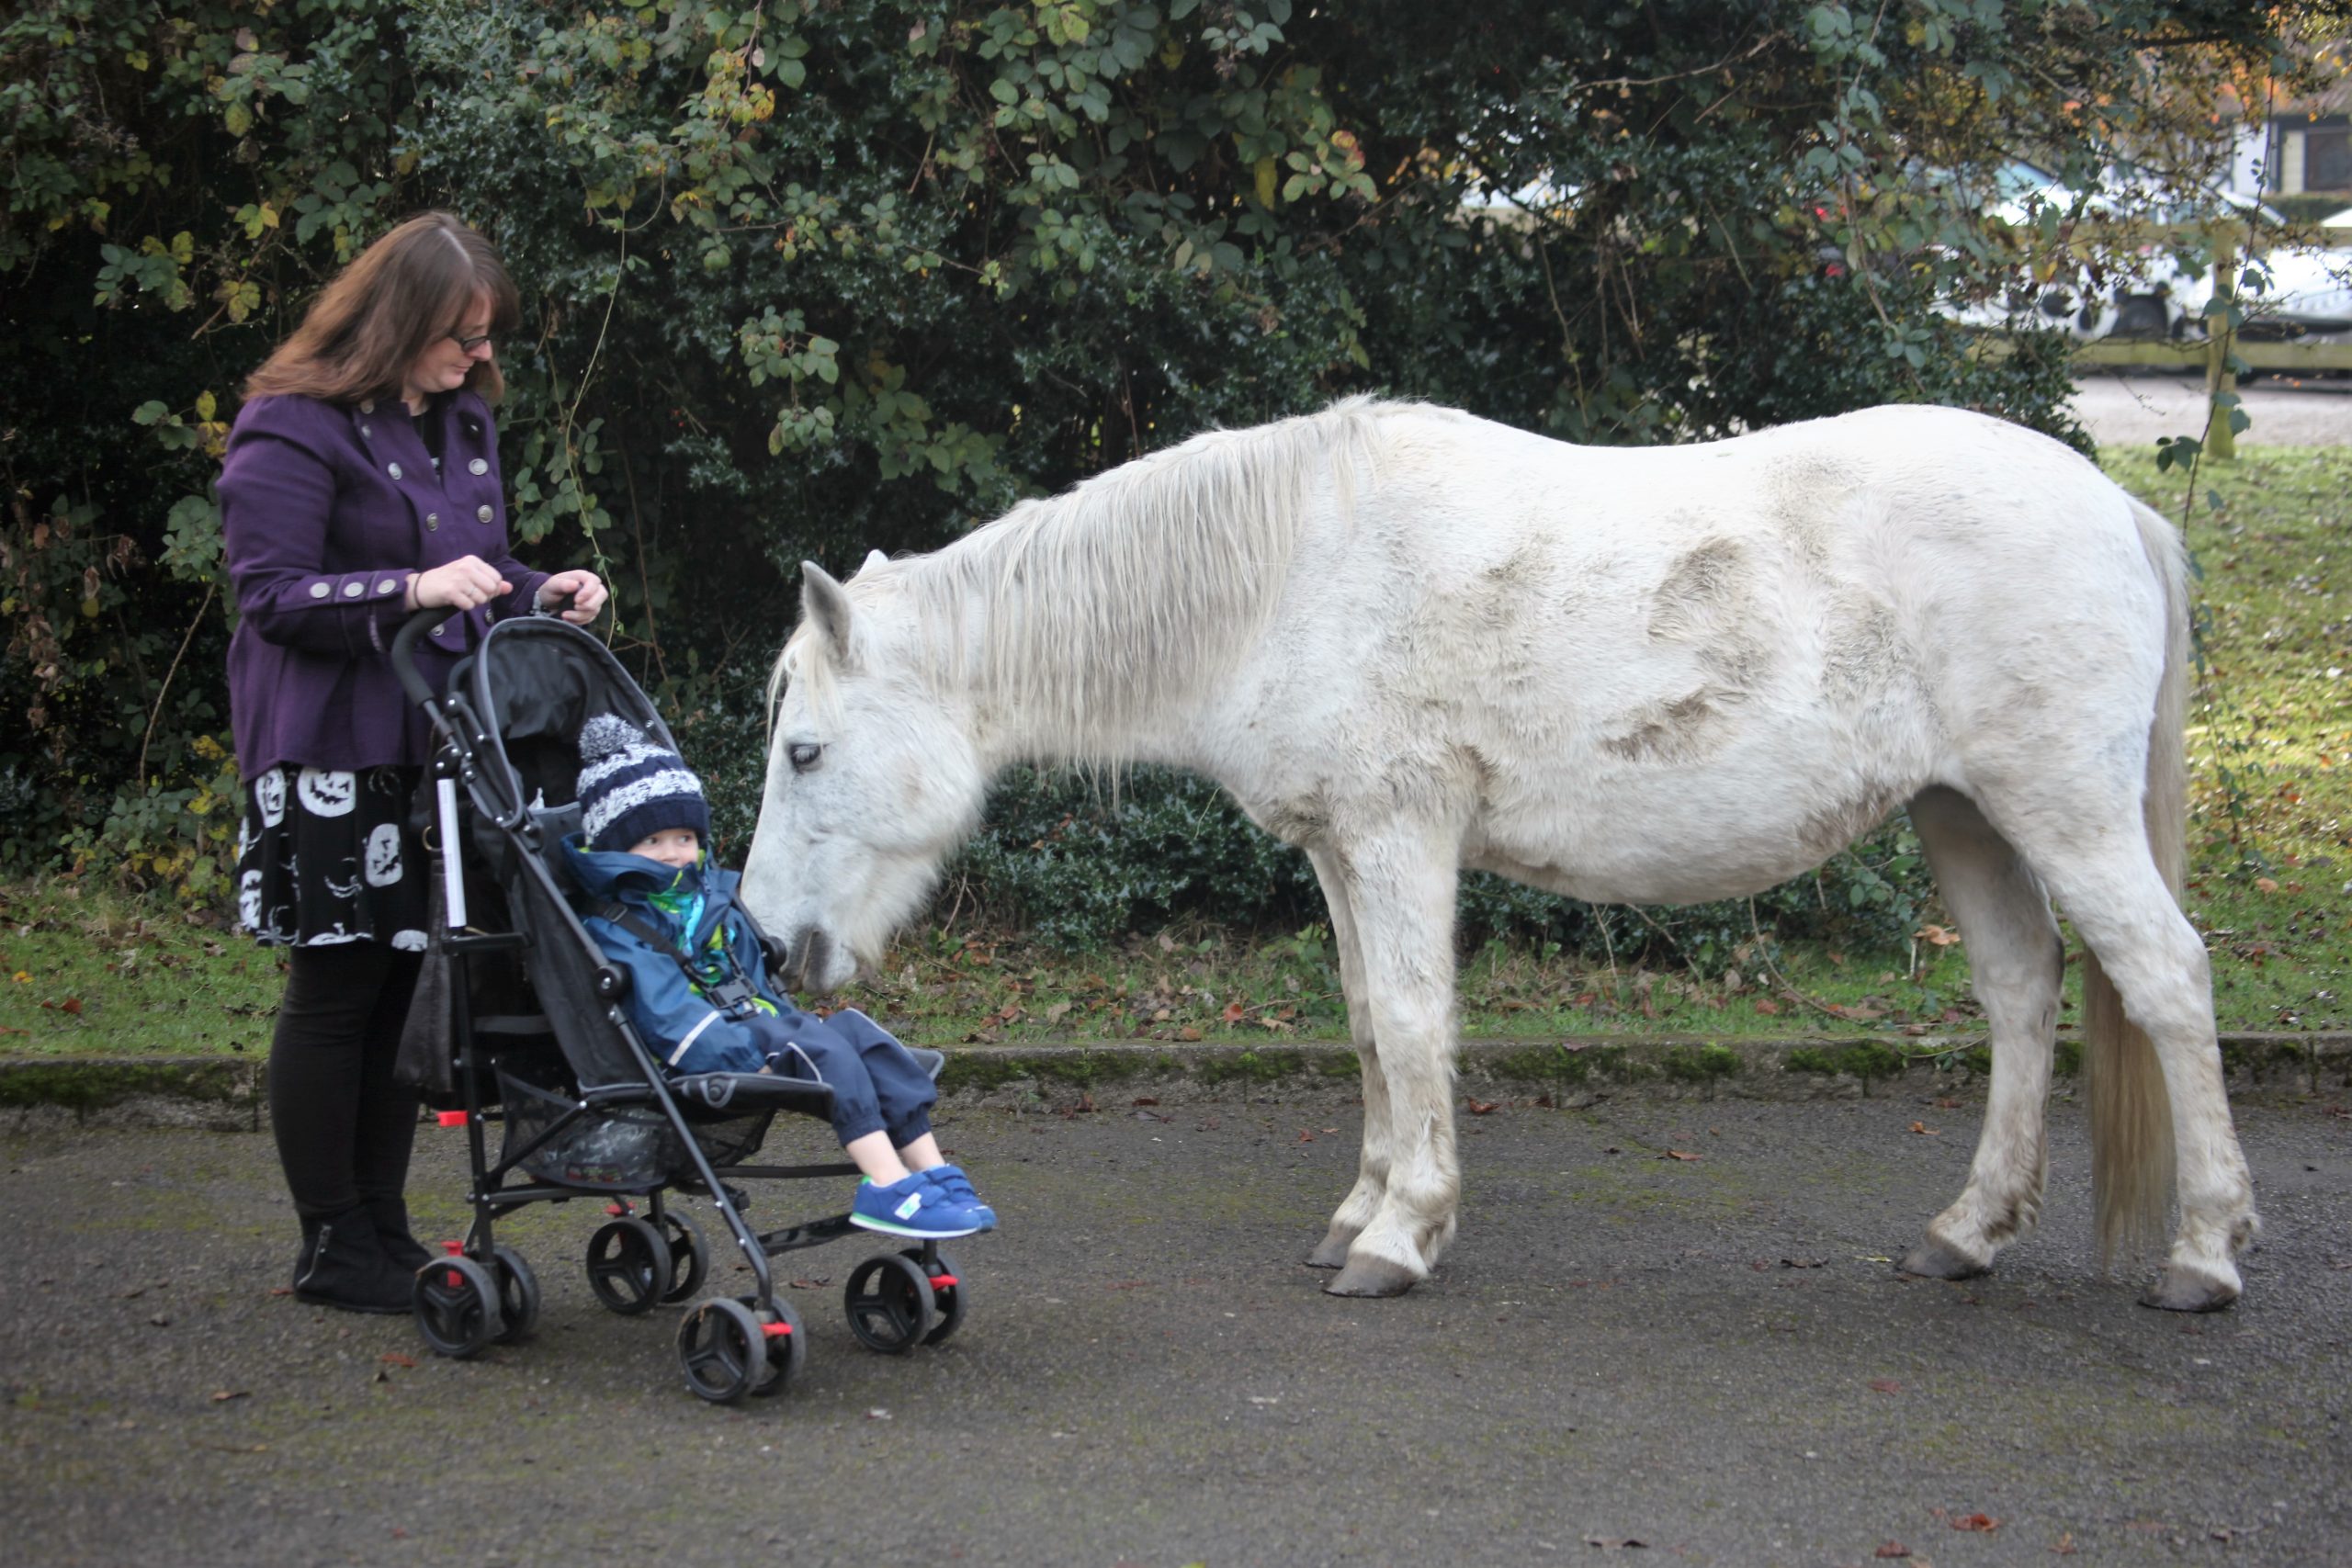 Pony and child in pushchair